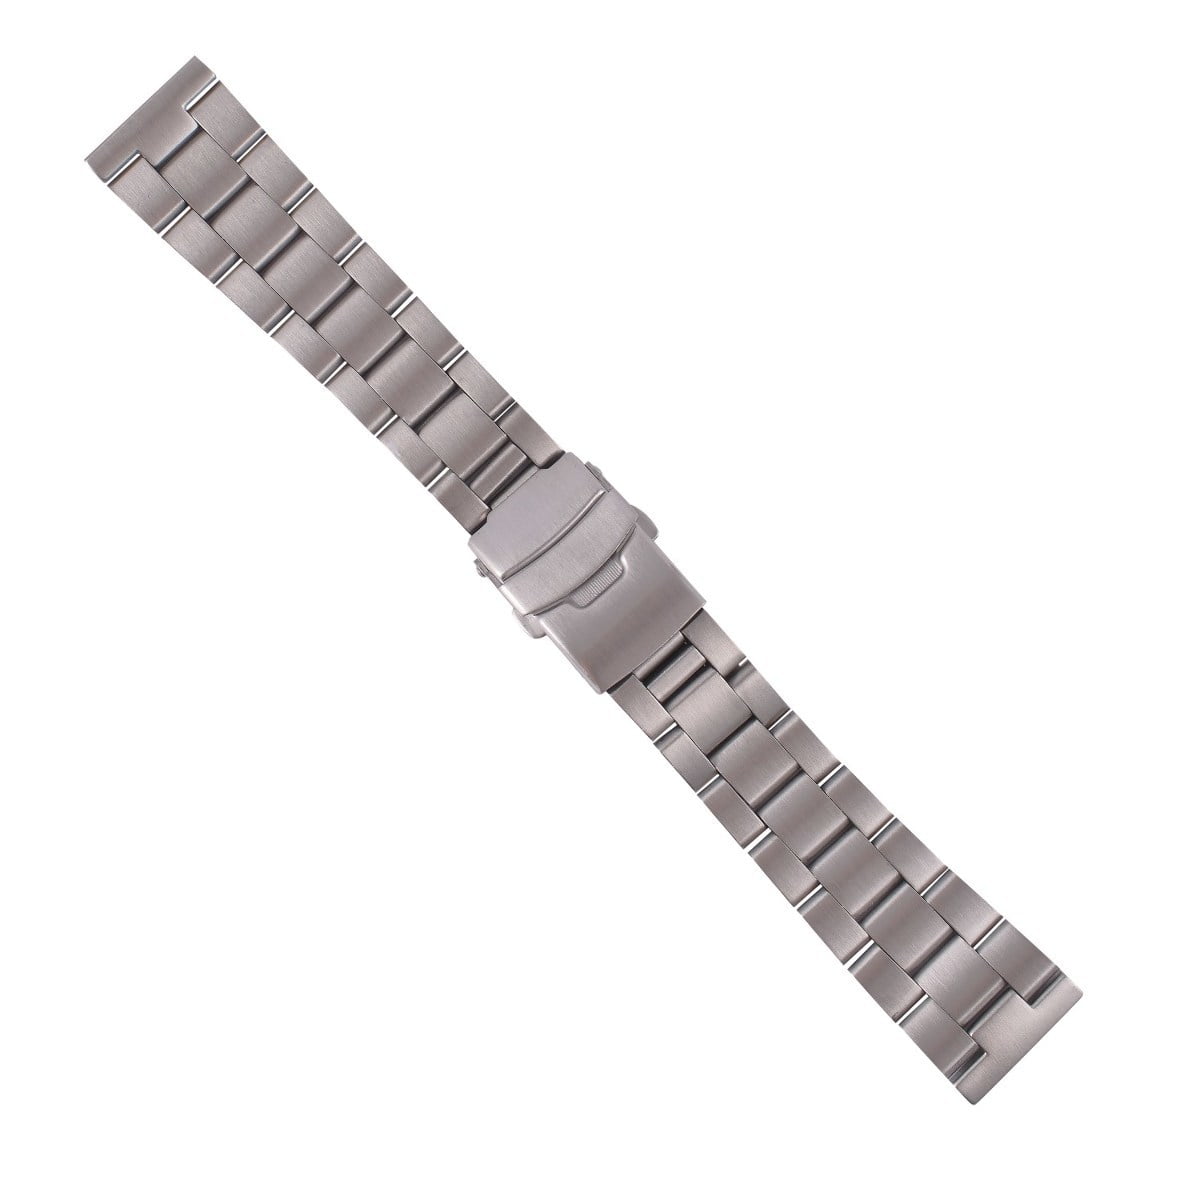 22MM OYSTER WATCH BAND FOR SEIKO 6309-7040, 6309-7049, 6309-7290 6309-729A  S/END 